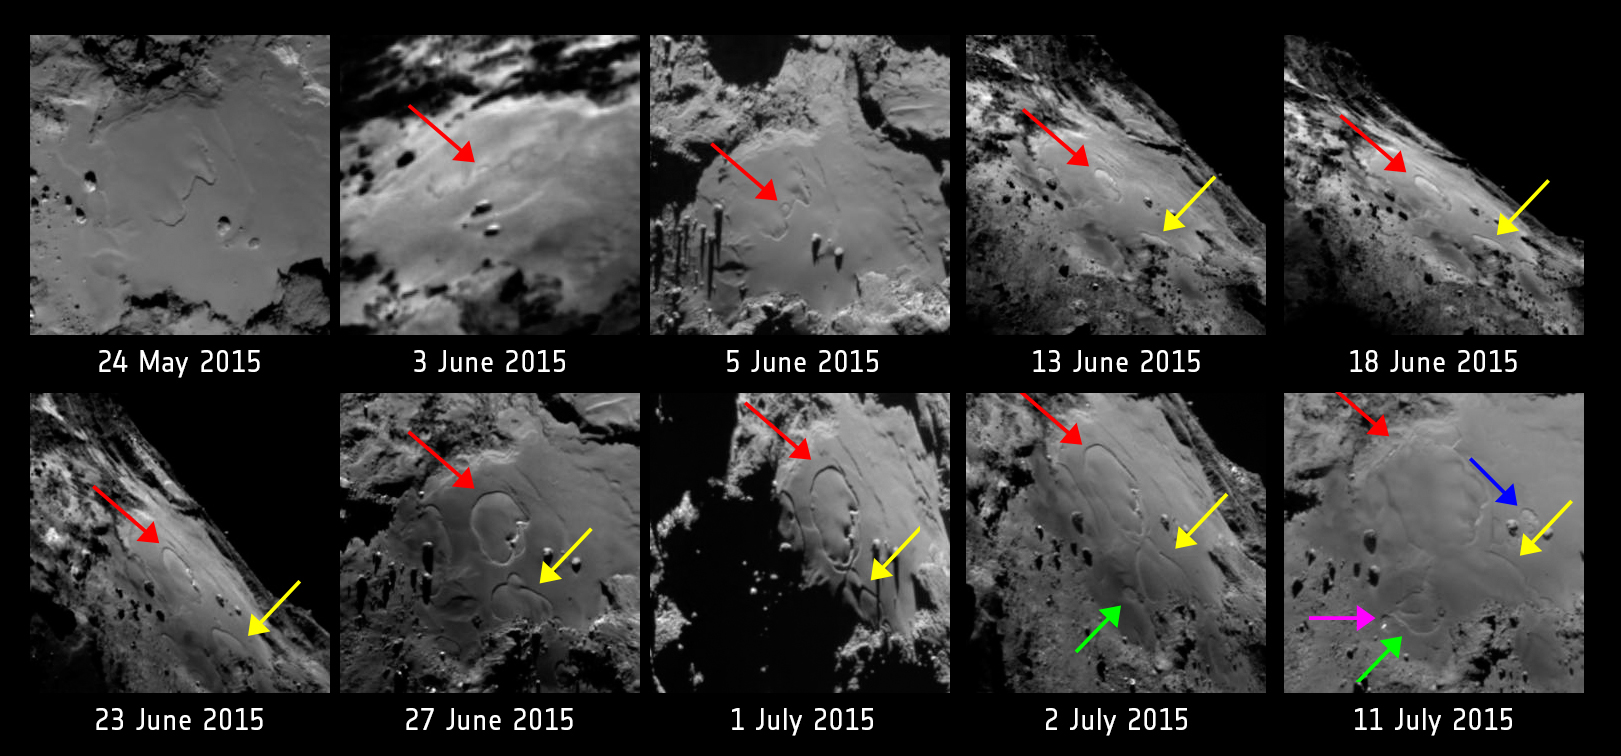 Annotated version of the image sequence, with dates and locations of the observed changes. Image Credit: ESA/Rosetta/MPS for OSIRIS Team MPS/UPD/LAM/IAA/SSO/INTA/UPM/DASP/IDA